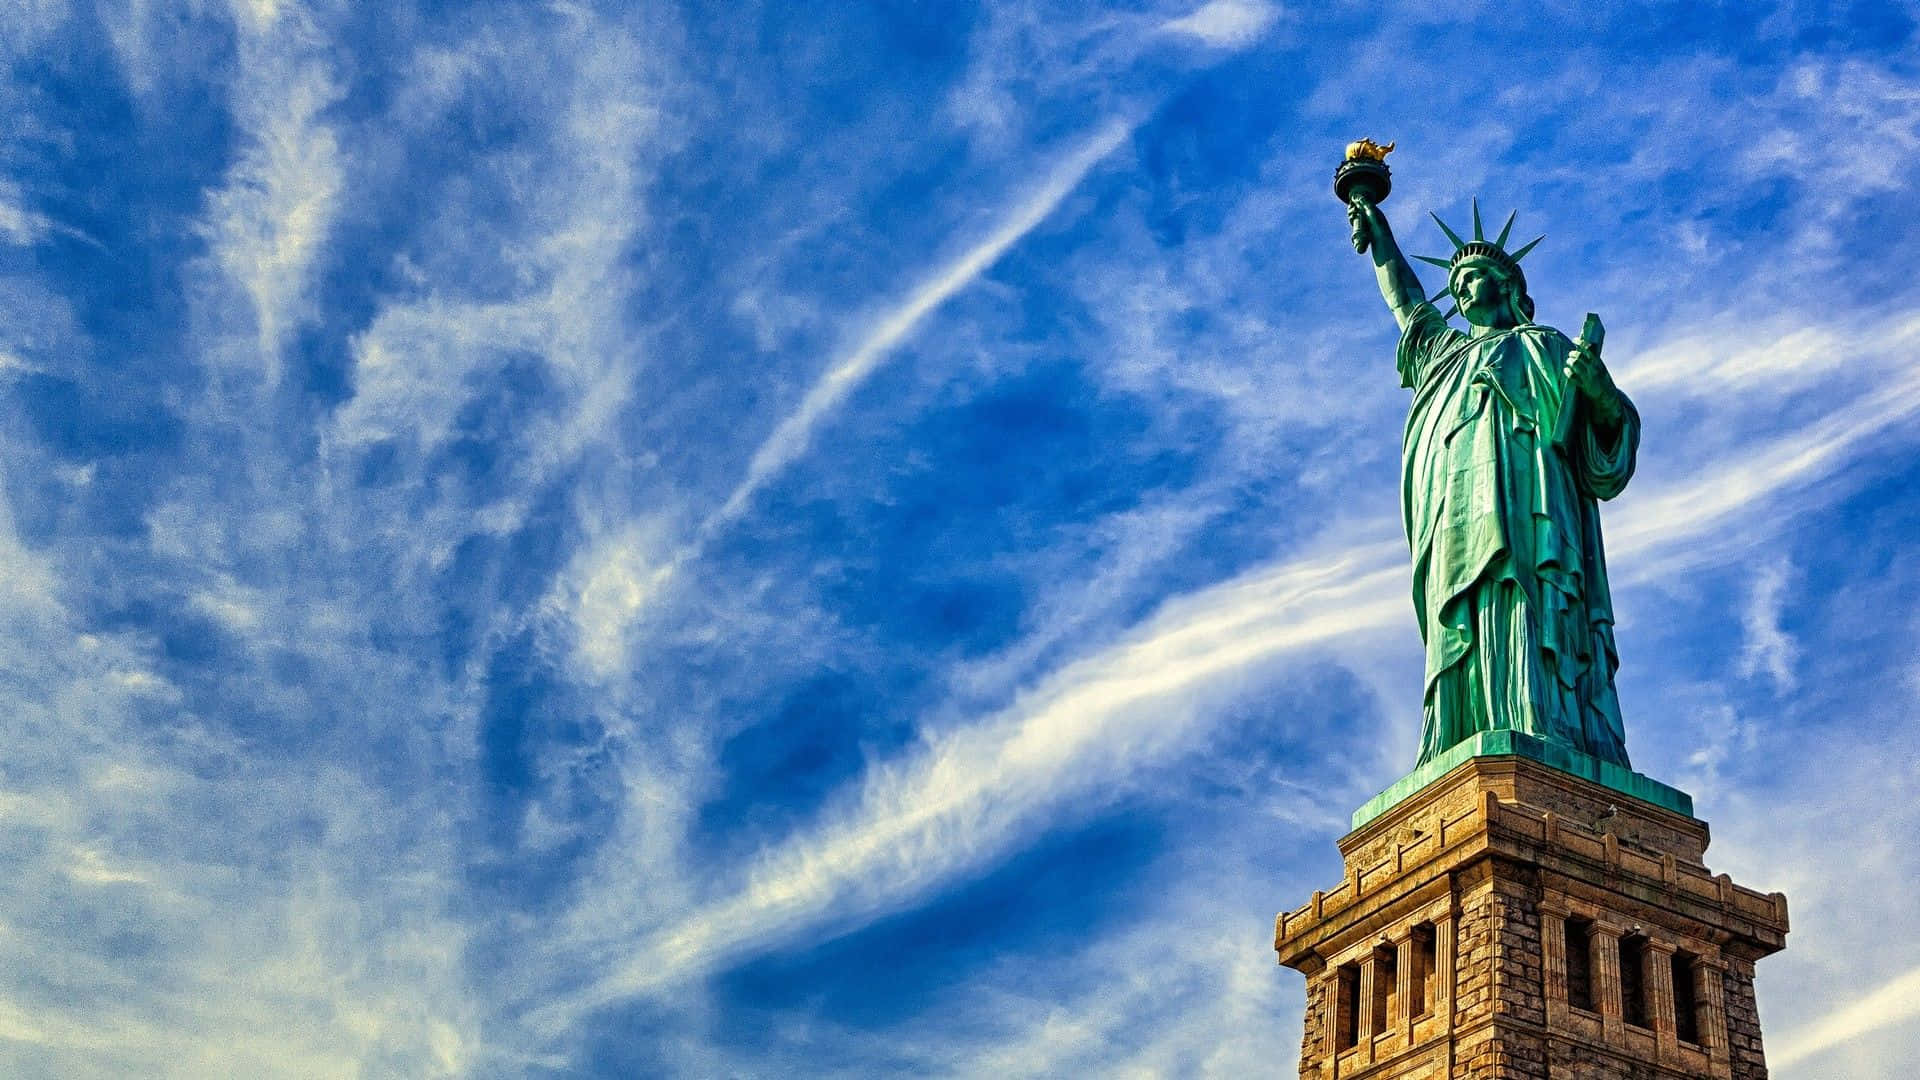 The iconic Statue of Liberty stands proud in New York